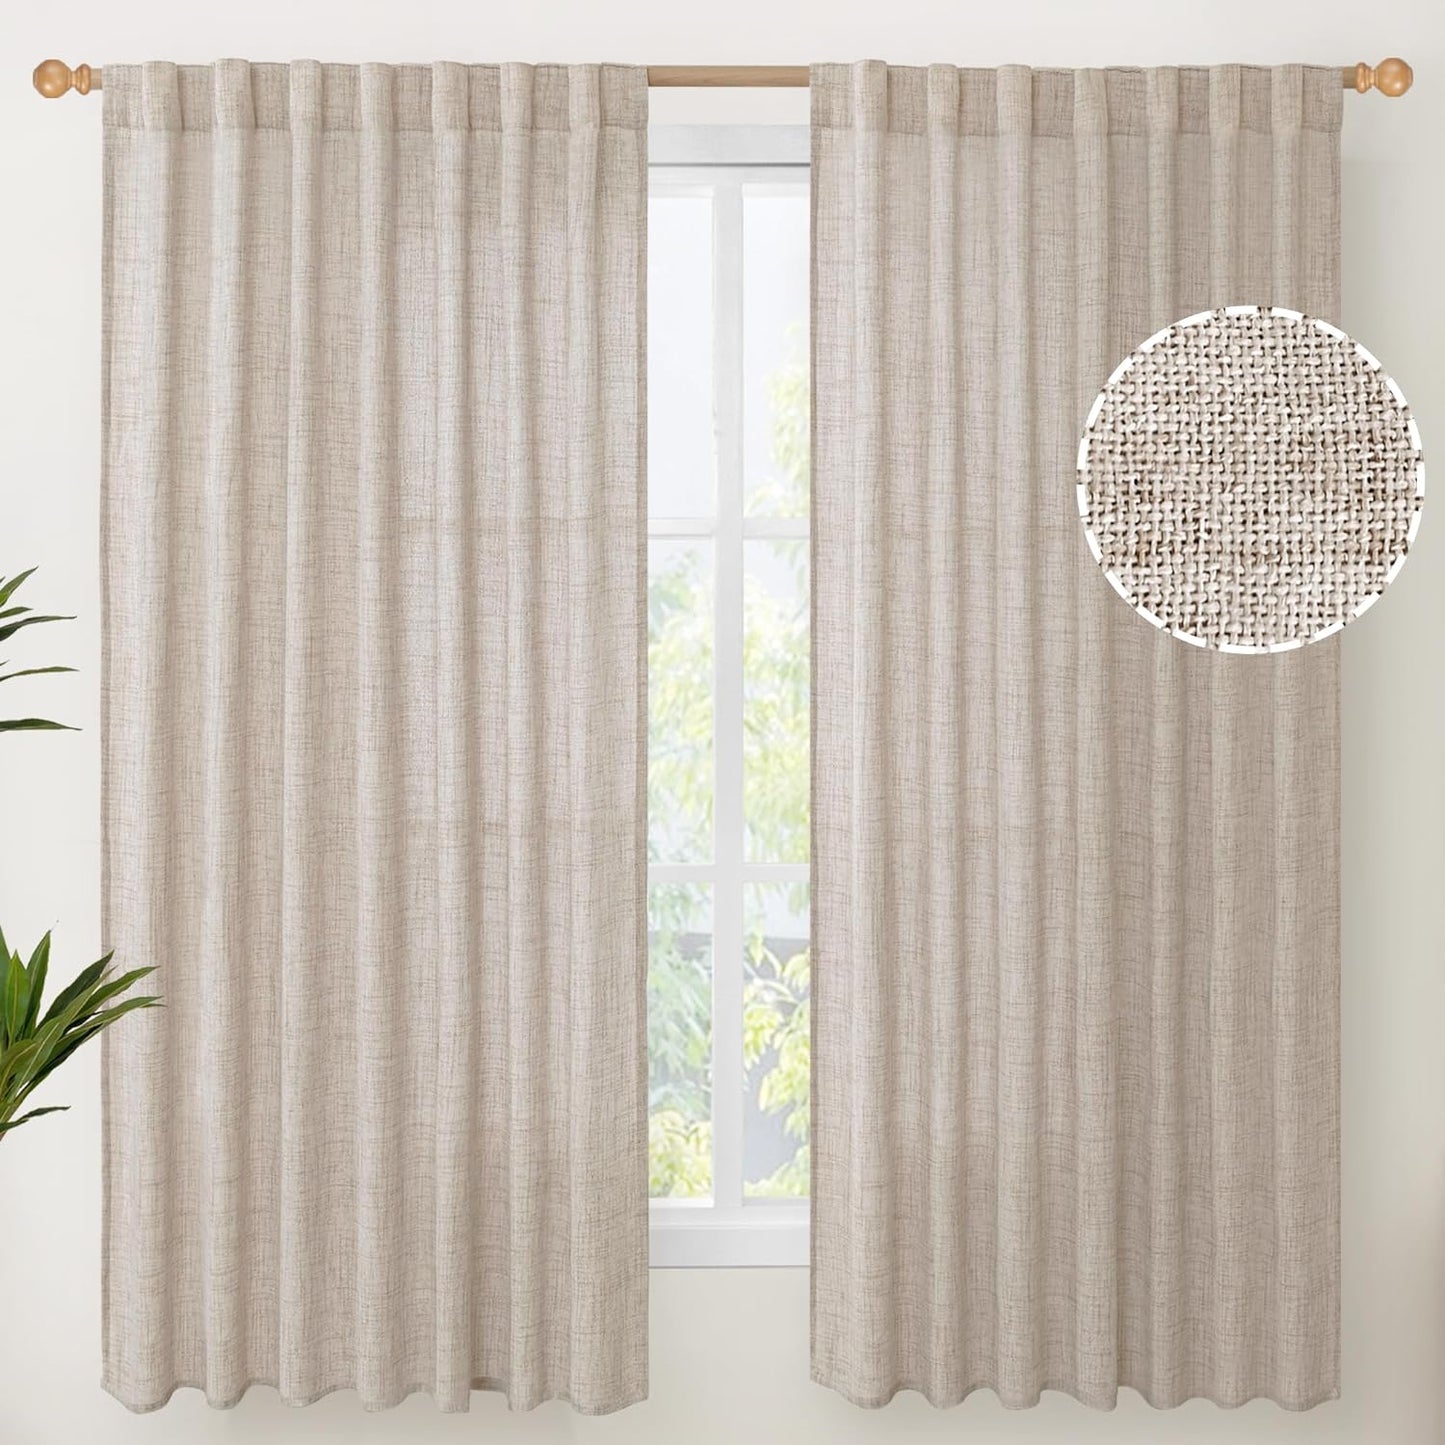 Youngstex Natural Linen Curtains 72 Inch Length 2 Panels for Living Room Light Filtering Textured Window Drapes for Bedroom Dining Office Back Tab Rod Pocket, 52 X 72 Inch  YoungsTex Natural 60W X 63L 